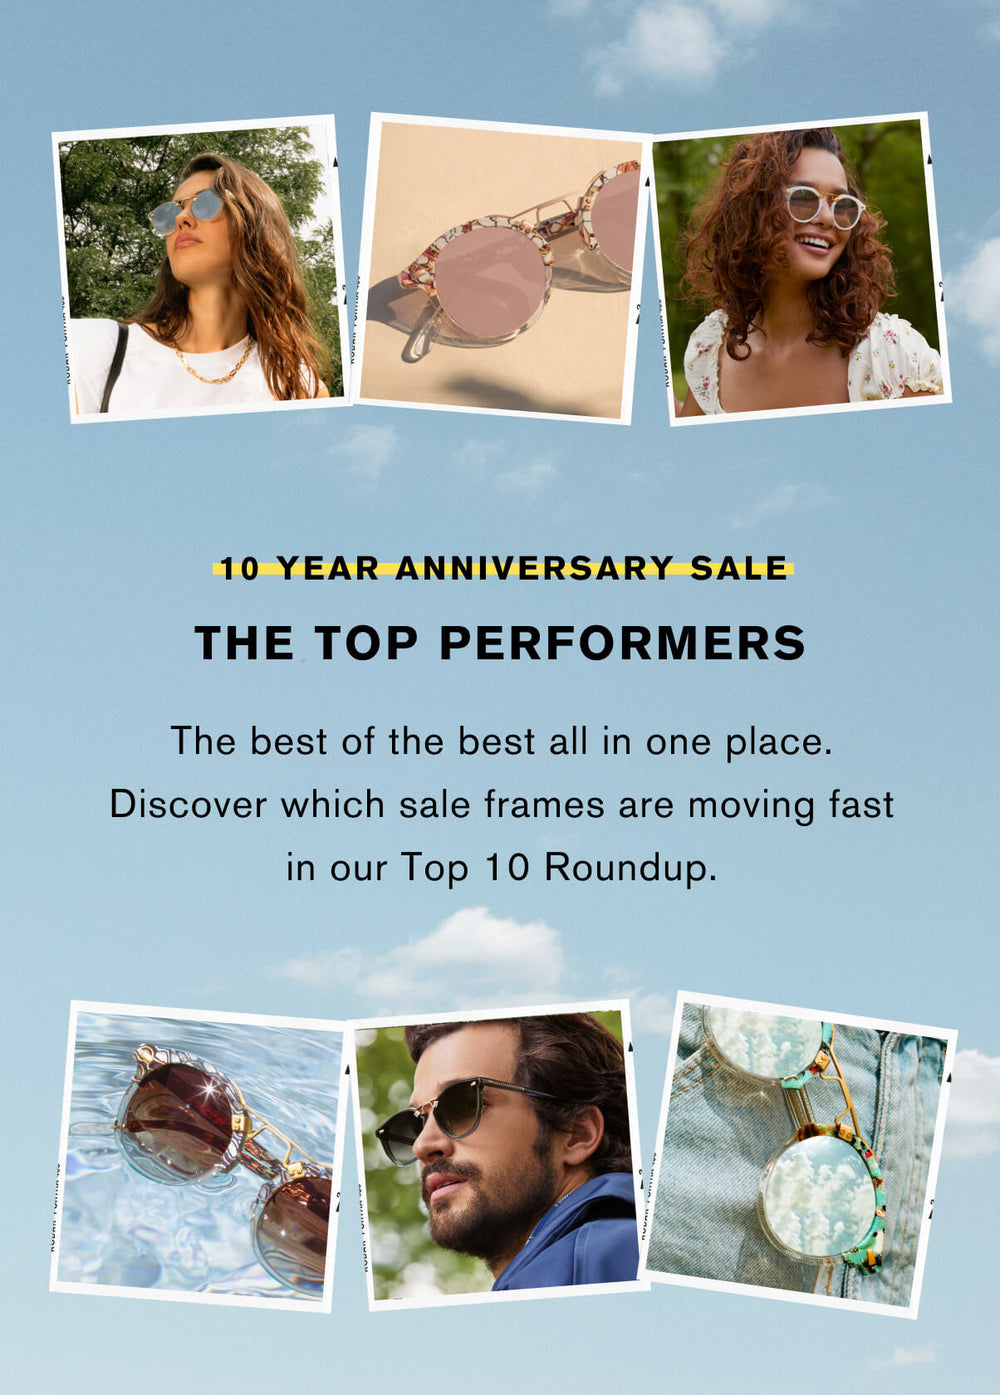 The top performers   The best of the best all in one place. Discover which sale frames are moving fast in our Top 10 Roundup